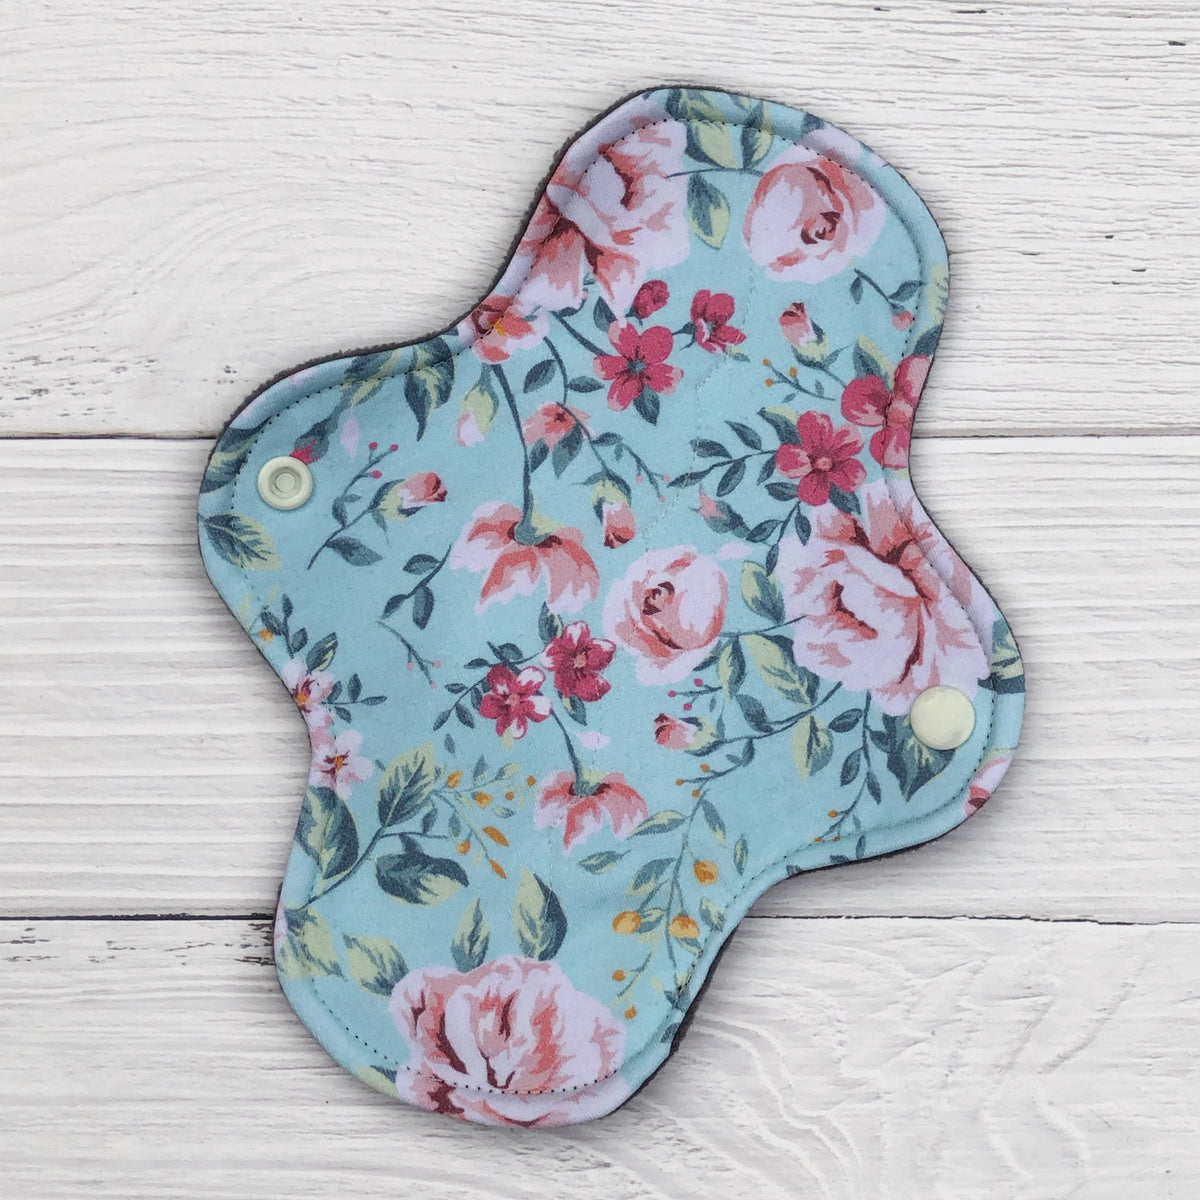 reusable pad in a mint floral print on a white wood background